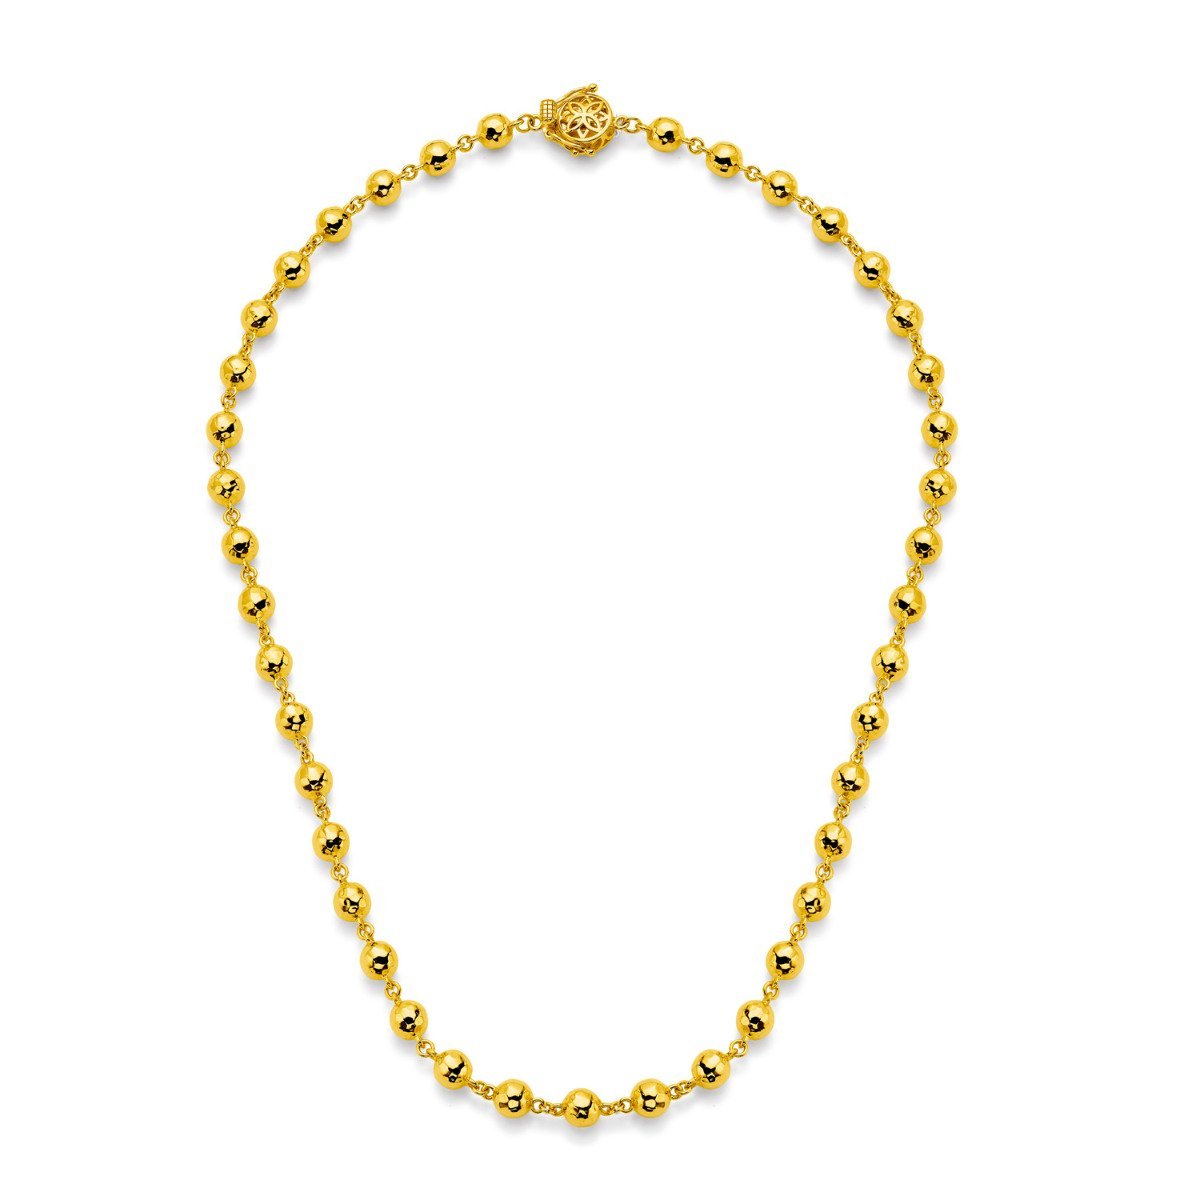 Buddha Mama 20" Hammered Disco Chain Necklace in 20kt Yellow Gold